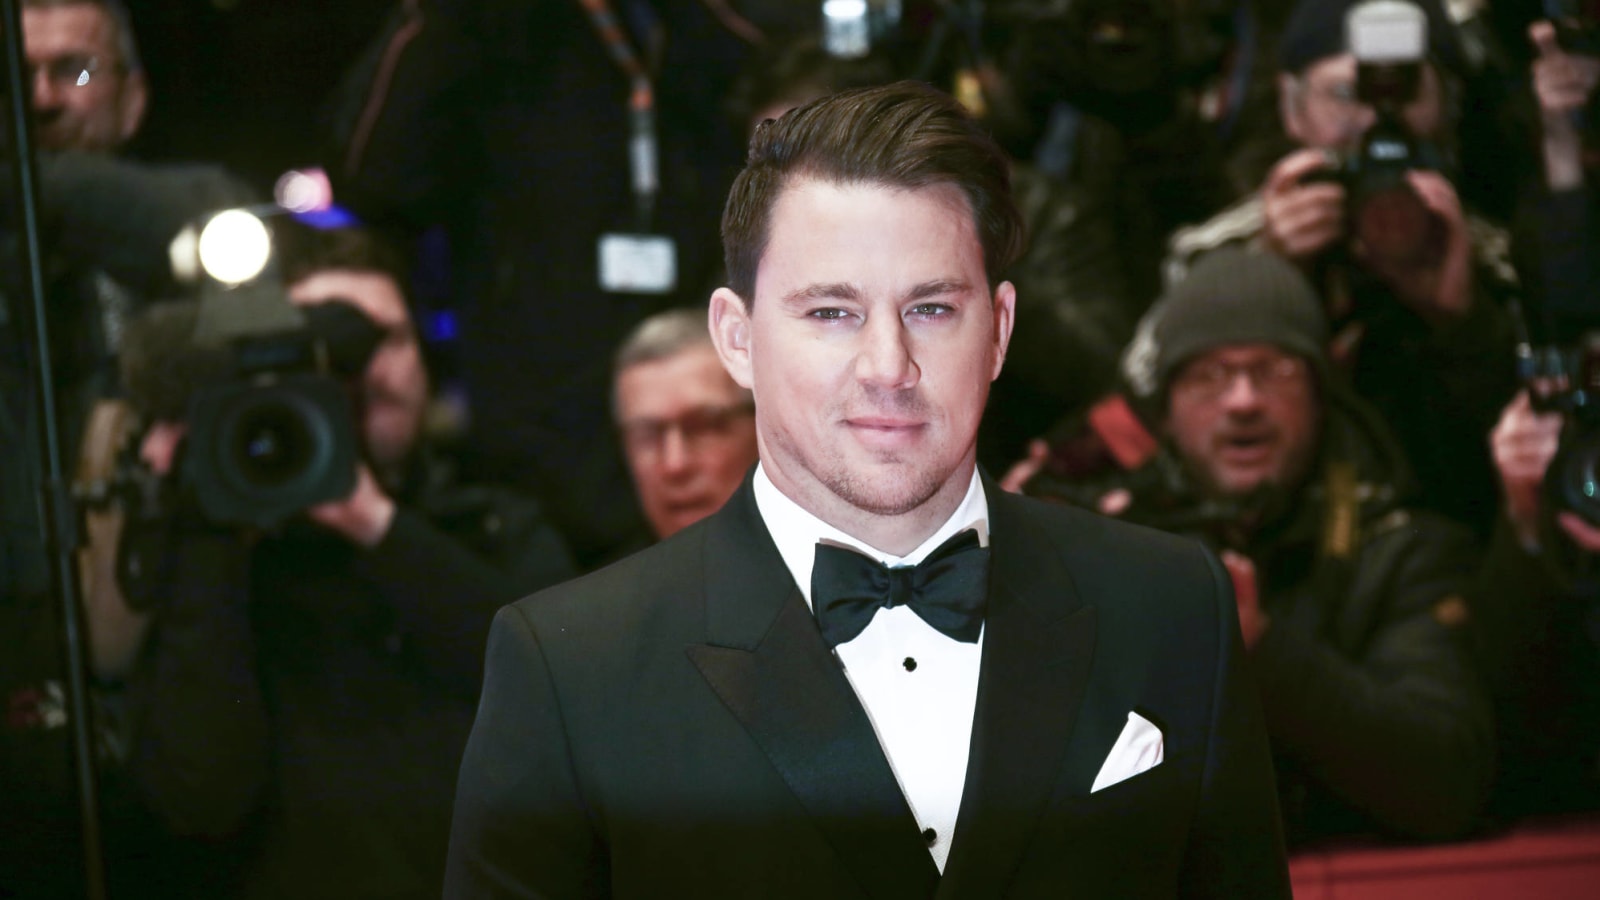 Channing Tatum jokes he only works out because he has to be naked on camera